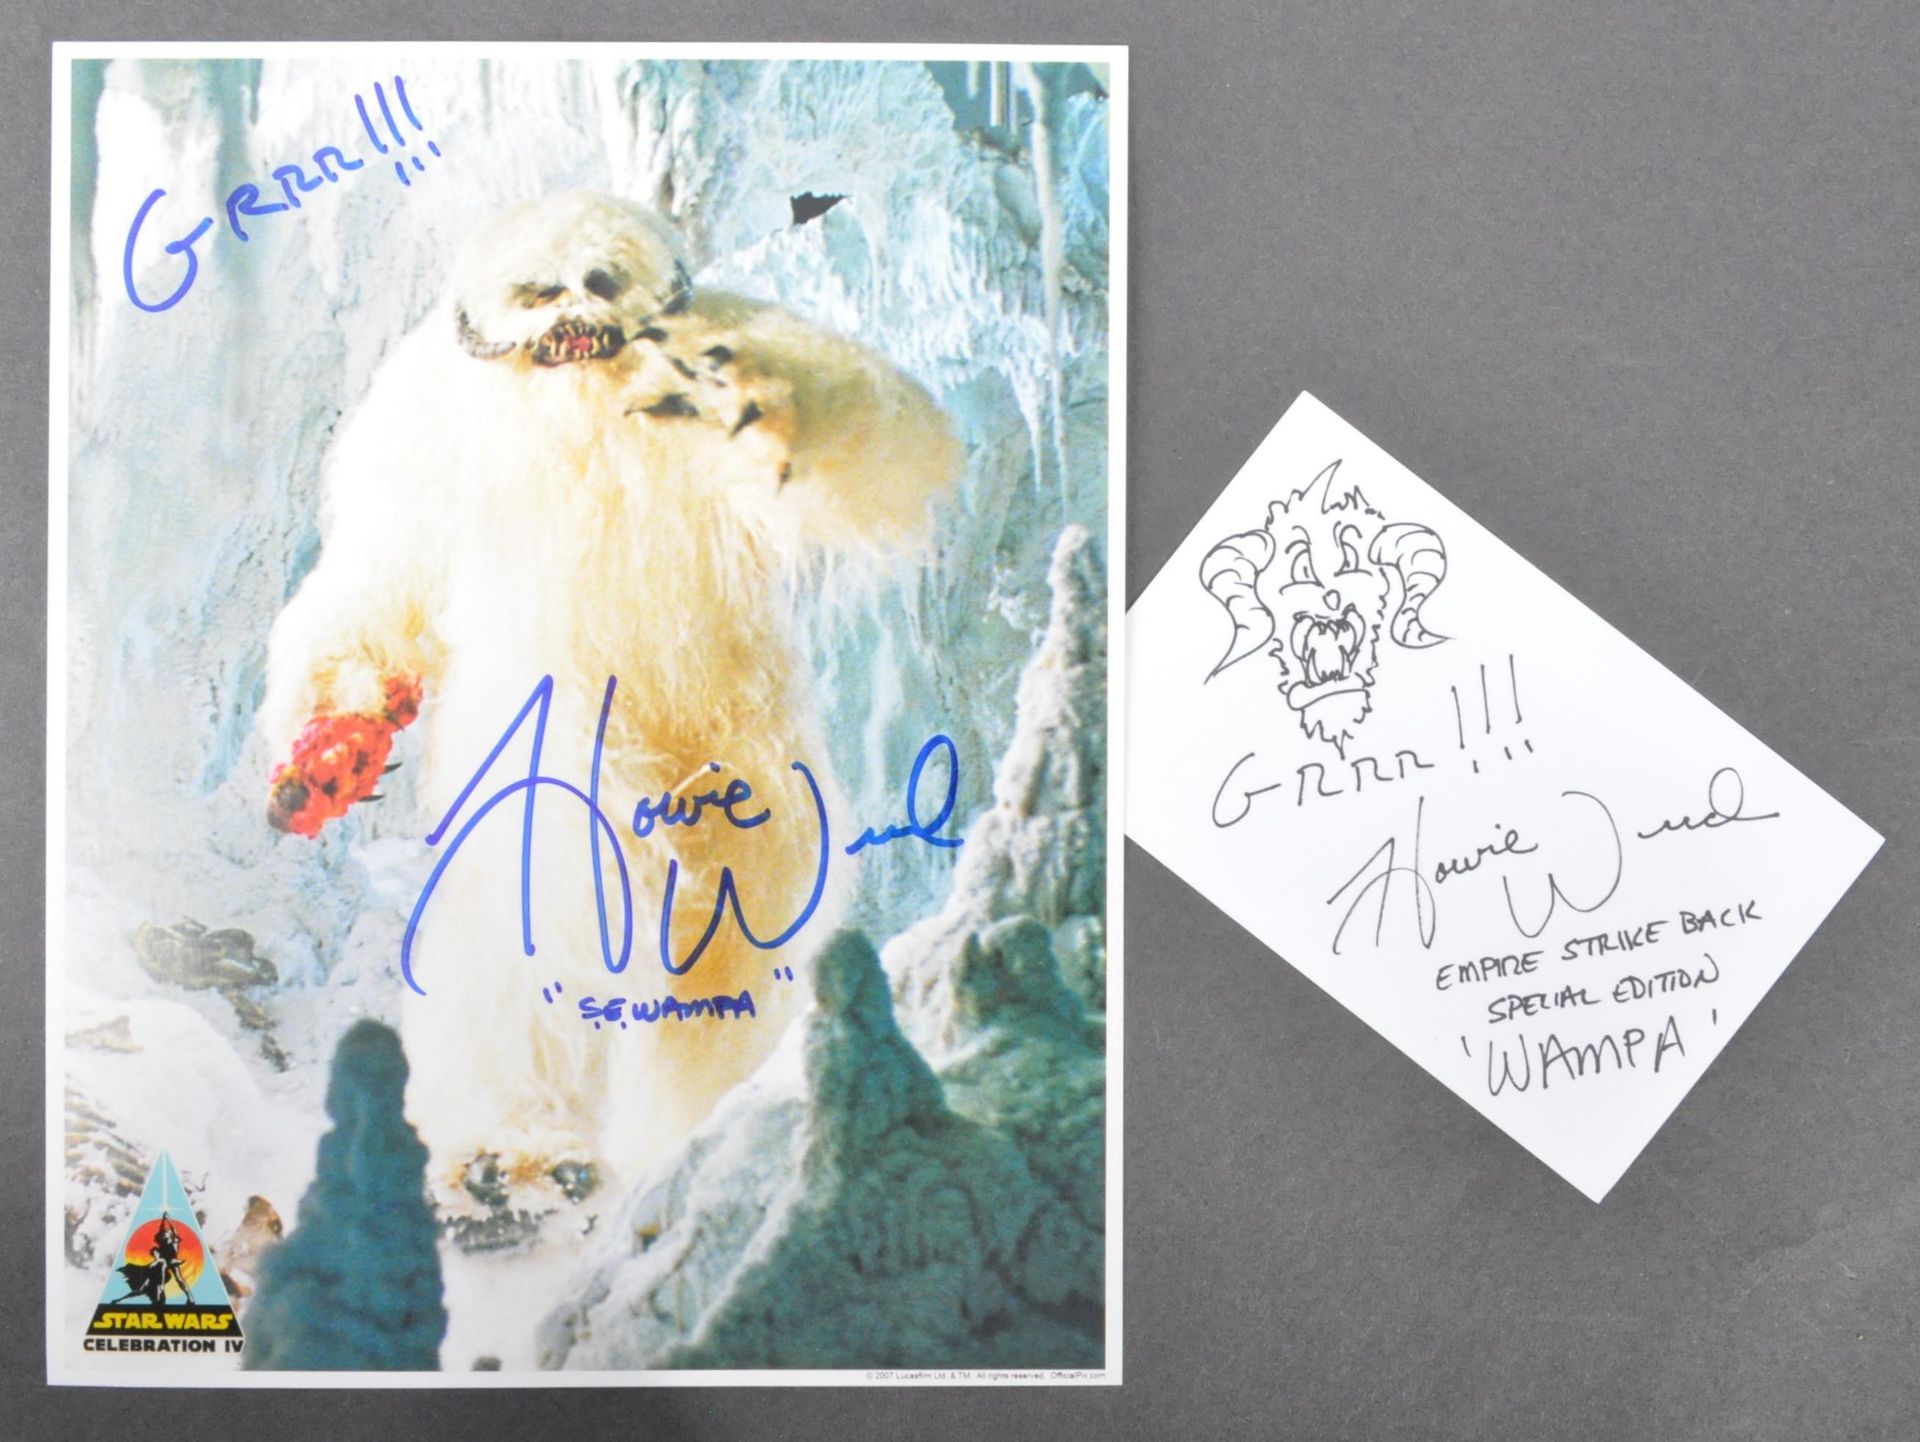 STAR WARS - HOWIE WEED - WAMPA - OFFICIAL PIX SIGNED PHOTO & SKETCH